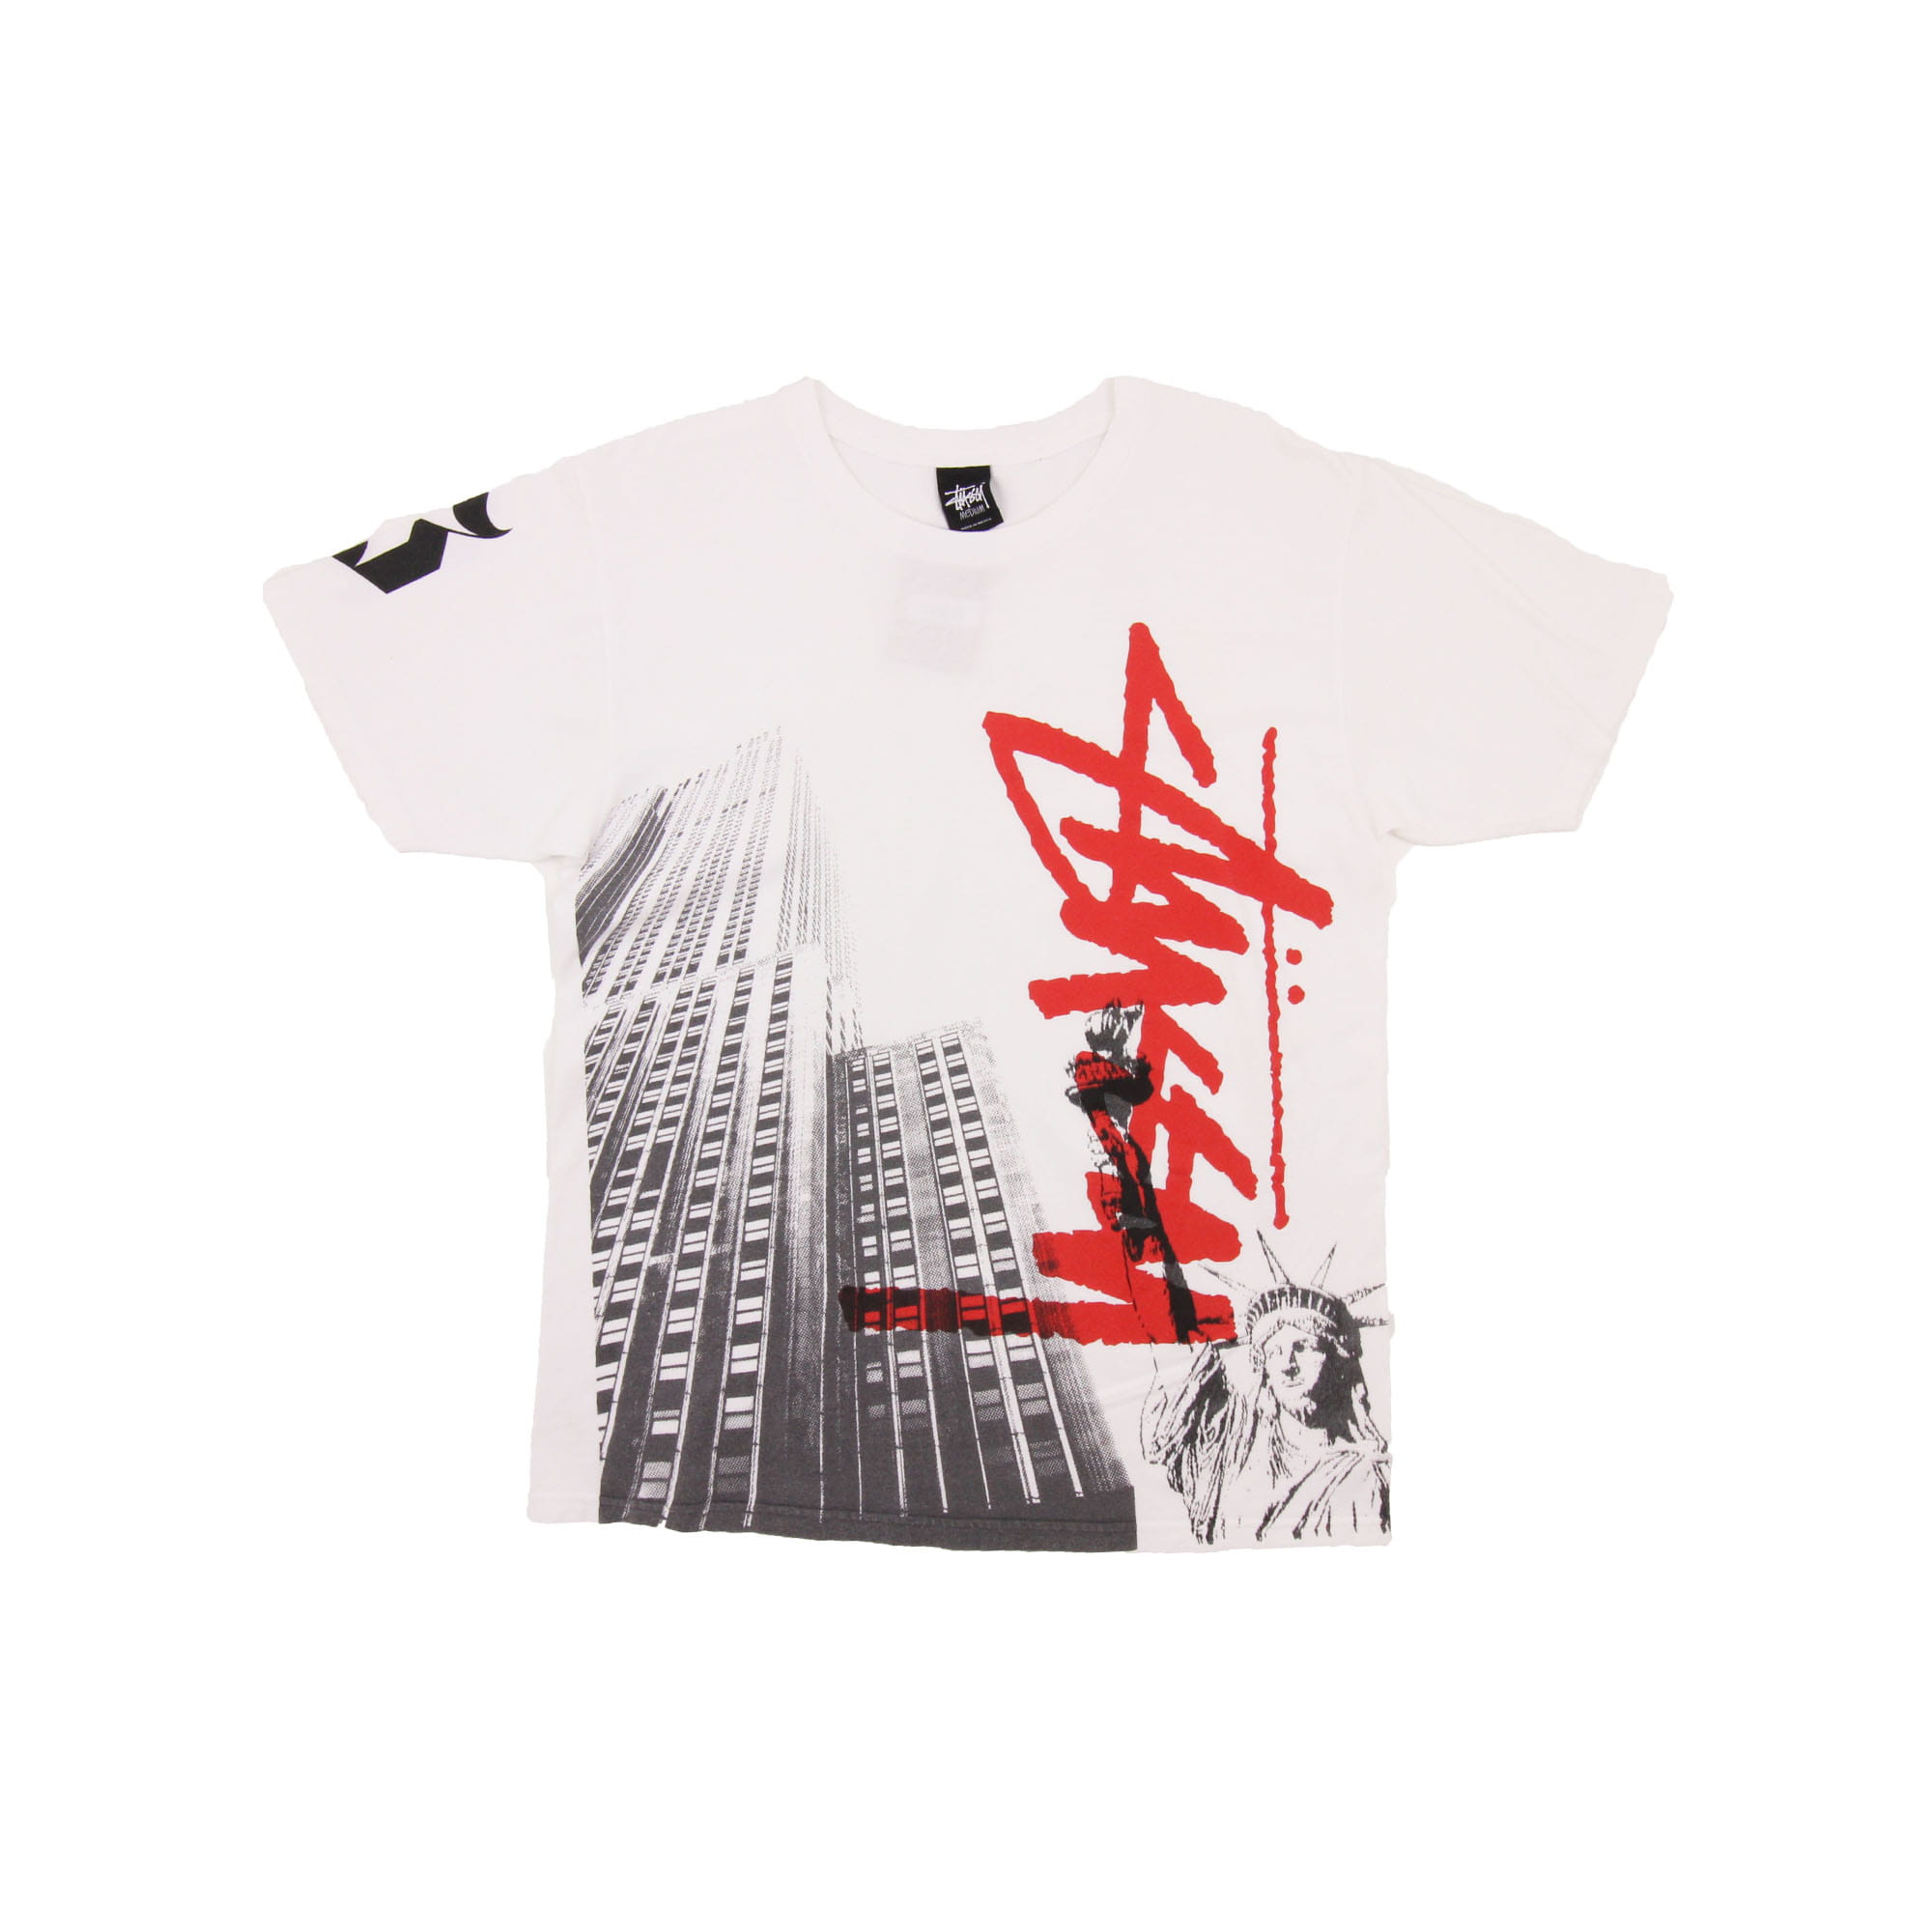 Stüssy Statue of Liberty Mid 00's Edition T-Shirt - M